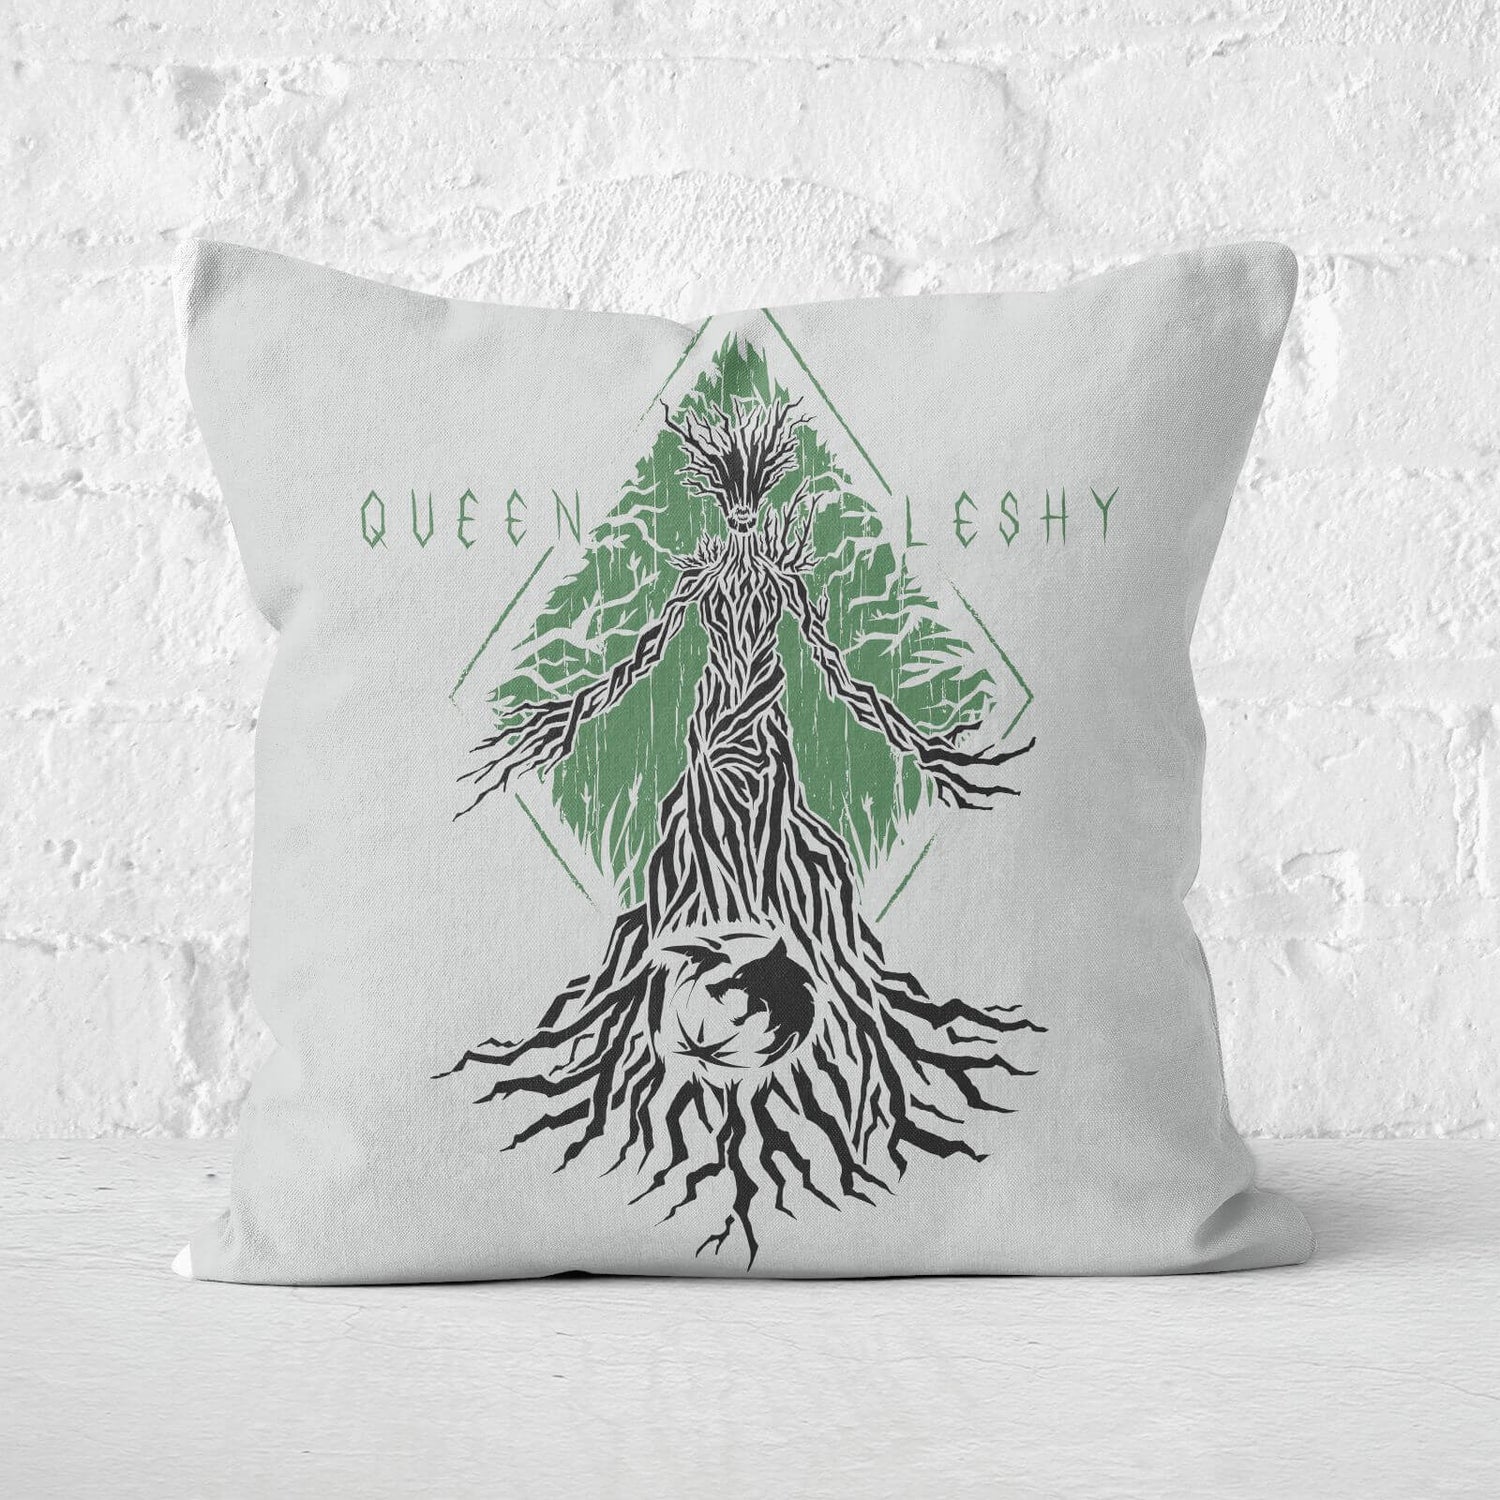 The Witcher Queen Leshy Square Cushion